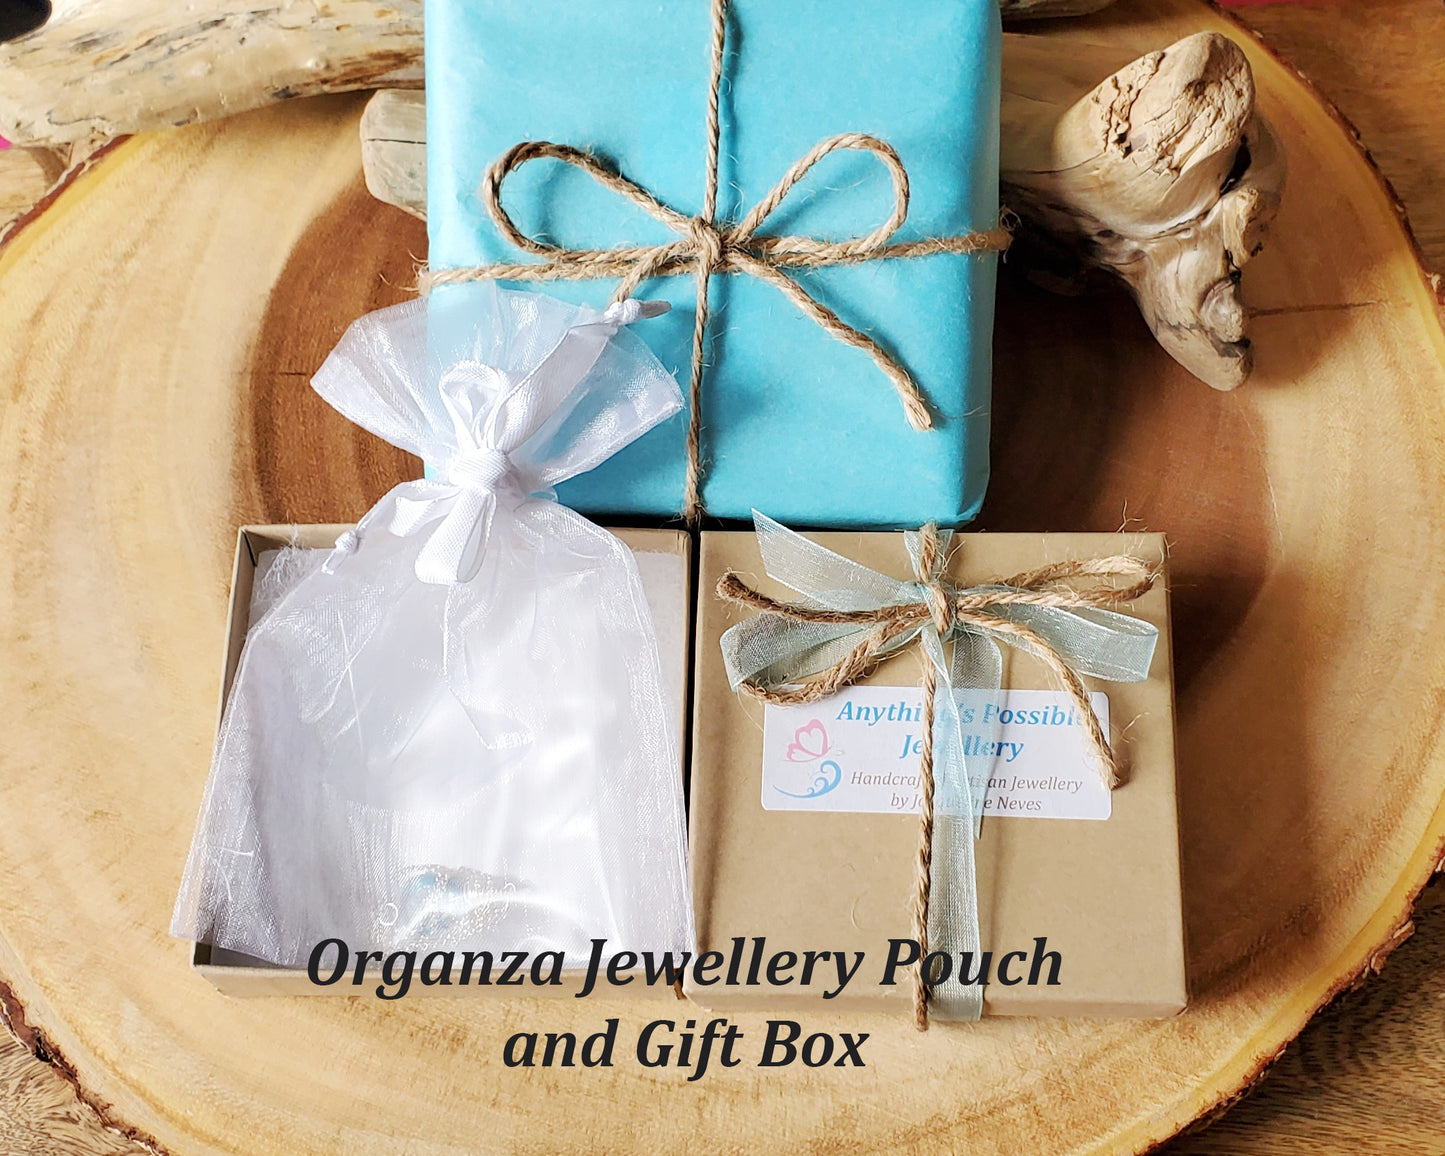 Eco Friendlier Recycled Paper Gift Box, Reusable White Organza Jewellery Pouch, Tissue Paper, Ribbon, and Twine